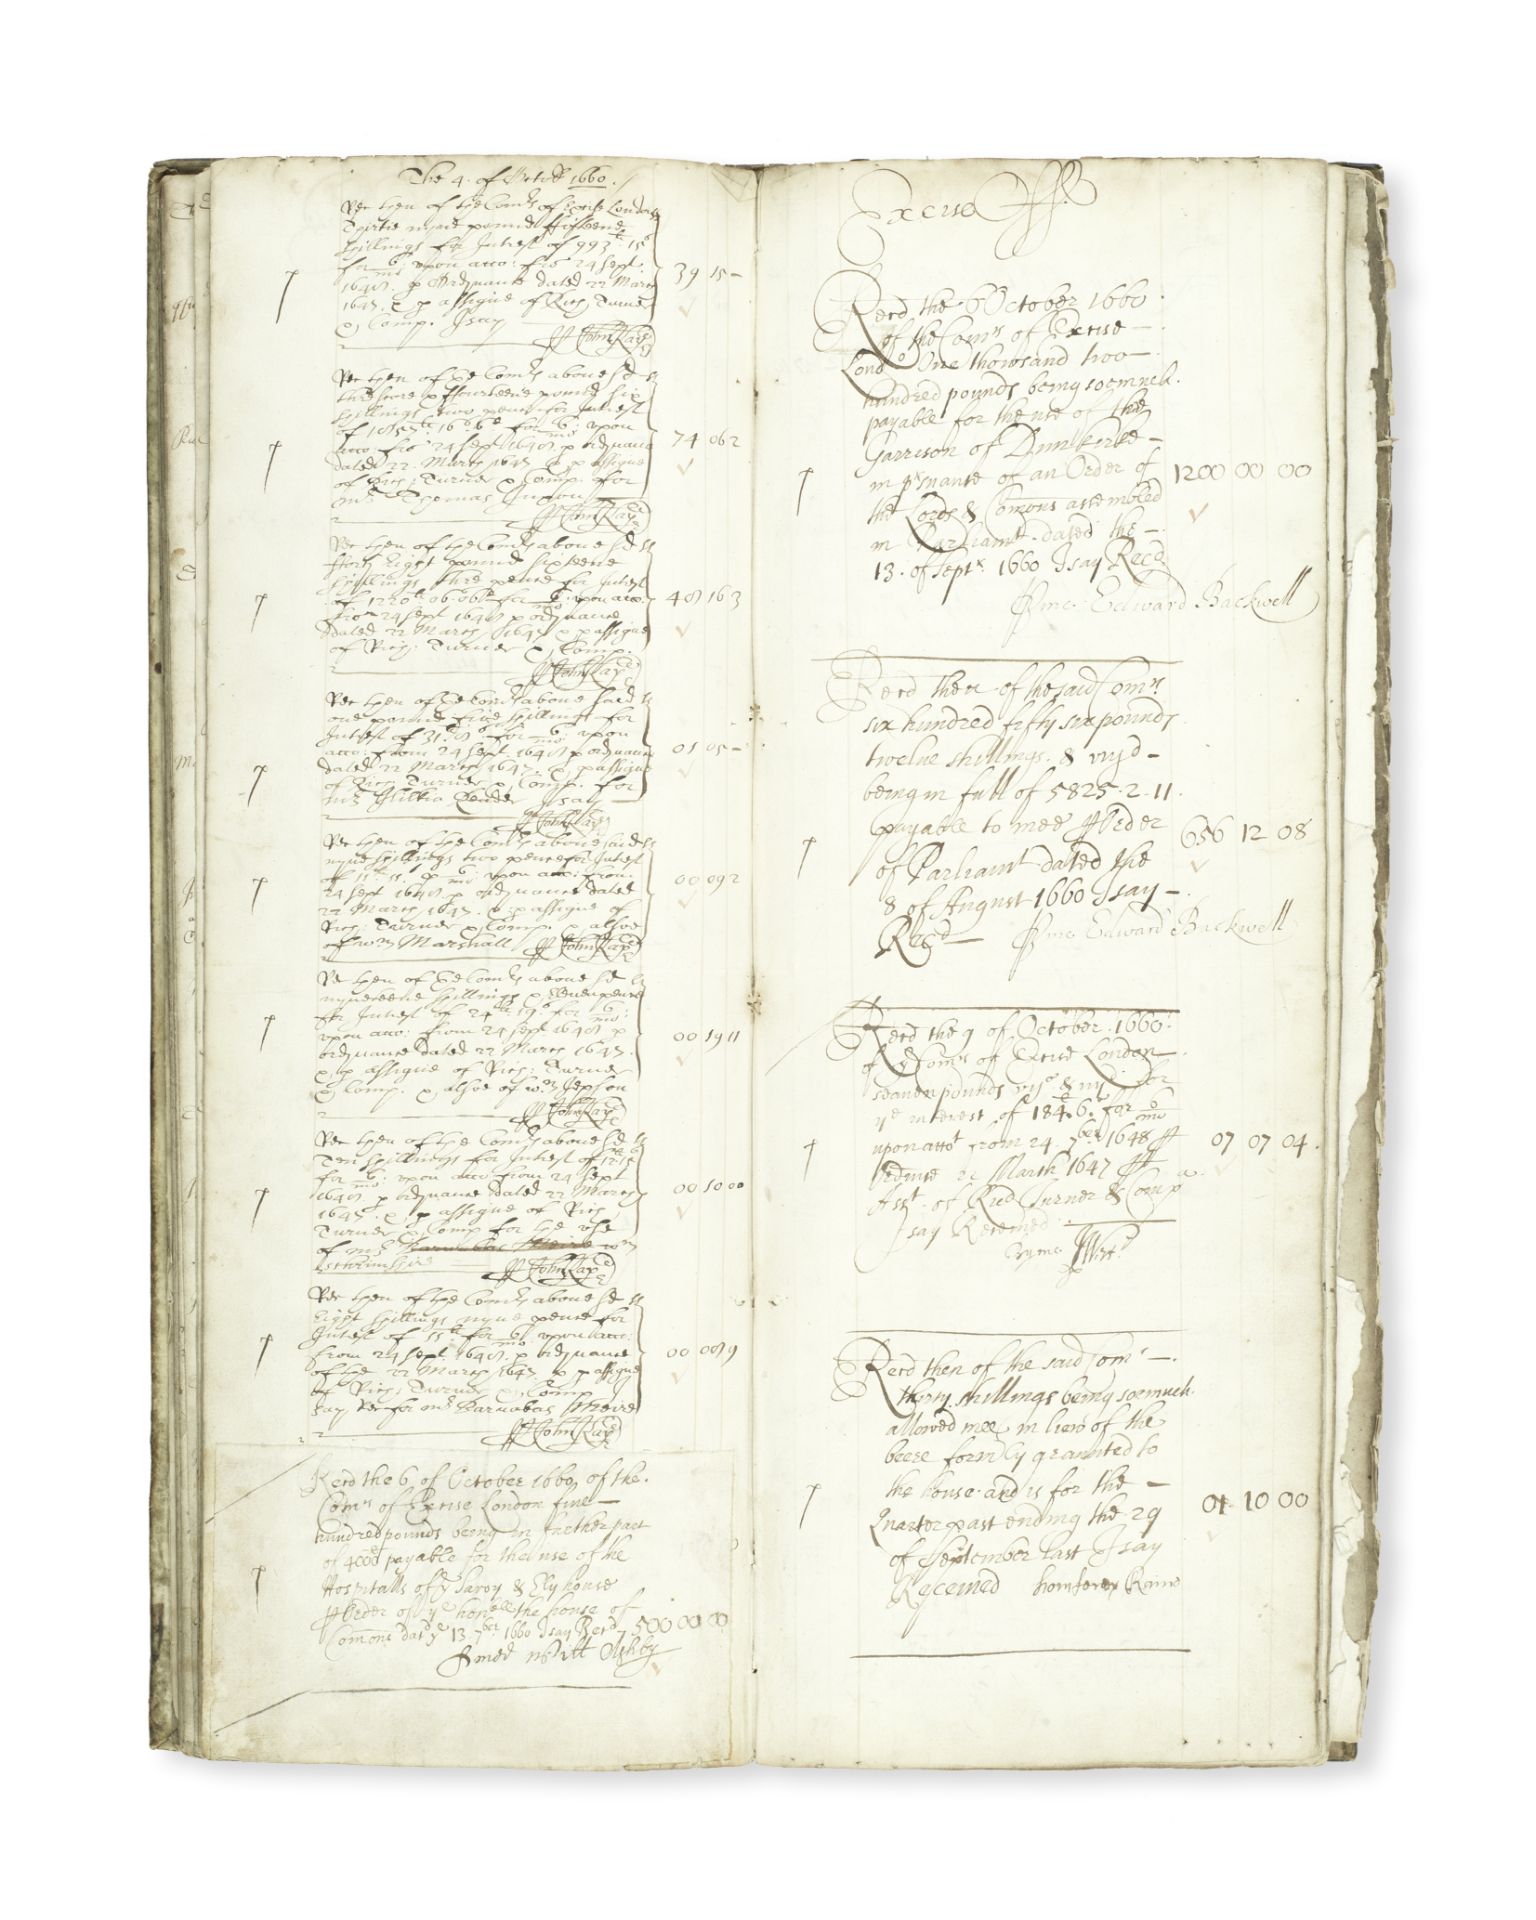 BANKING - SEVENTEENTH CENTURY Banking ledger kept in person by Edward Backwell, containing well o...